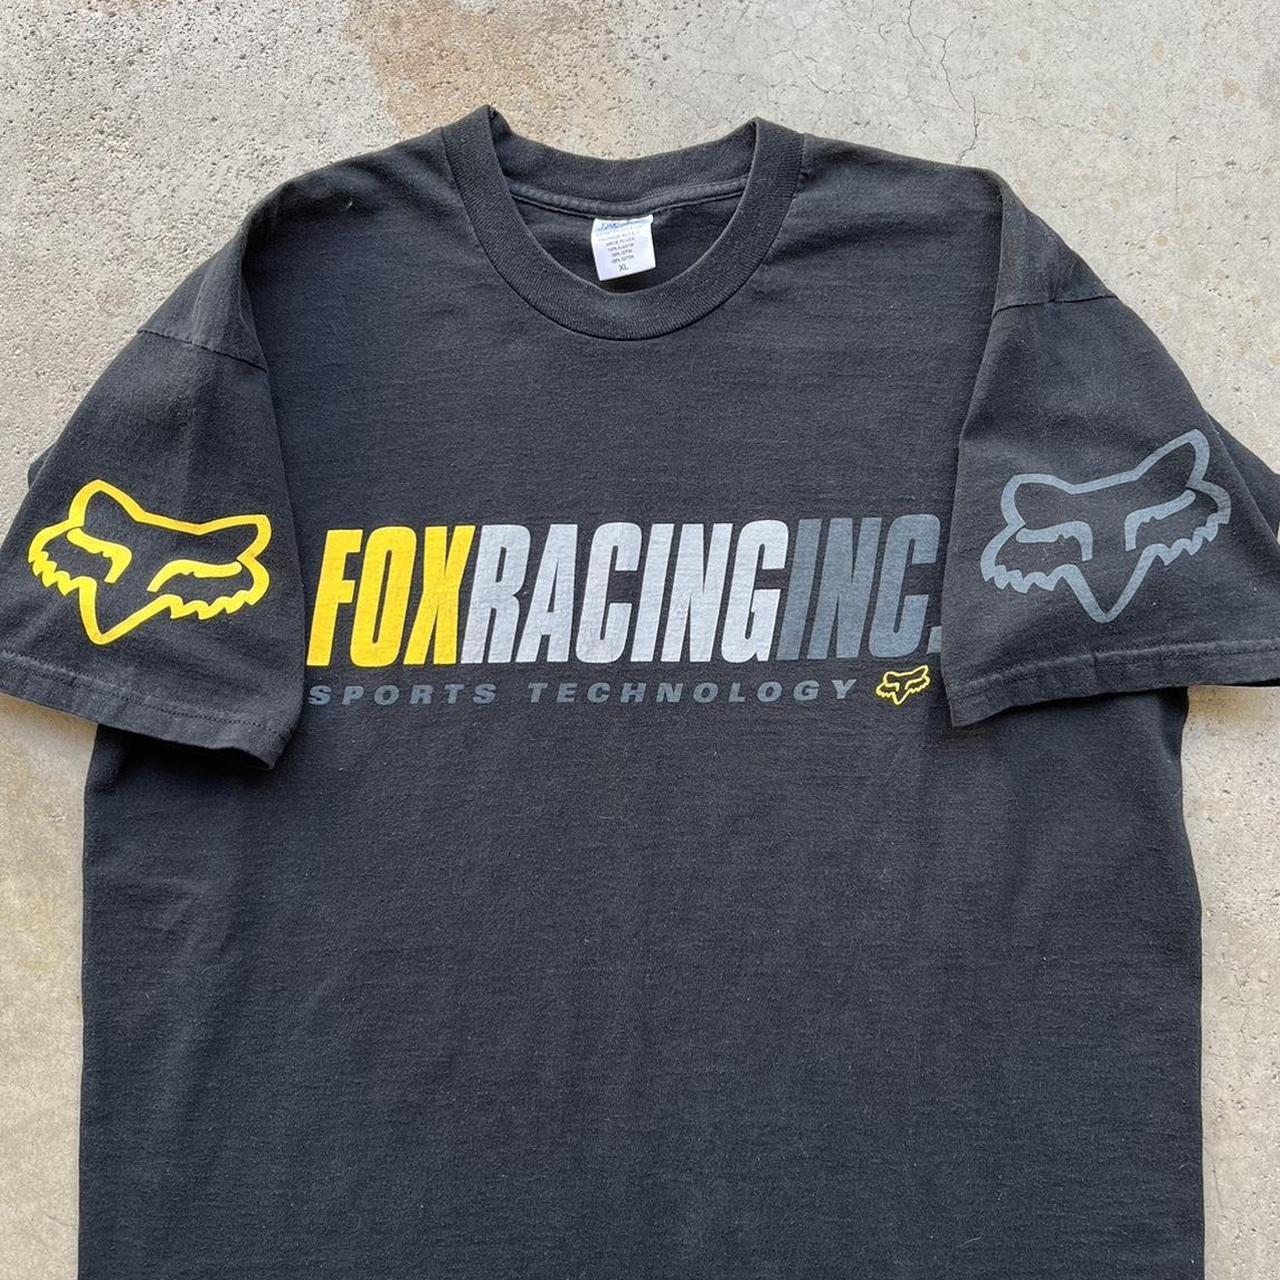 Vintage 90’s Fox Racing T-Shirt, Made in USA, Tagged...